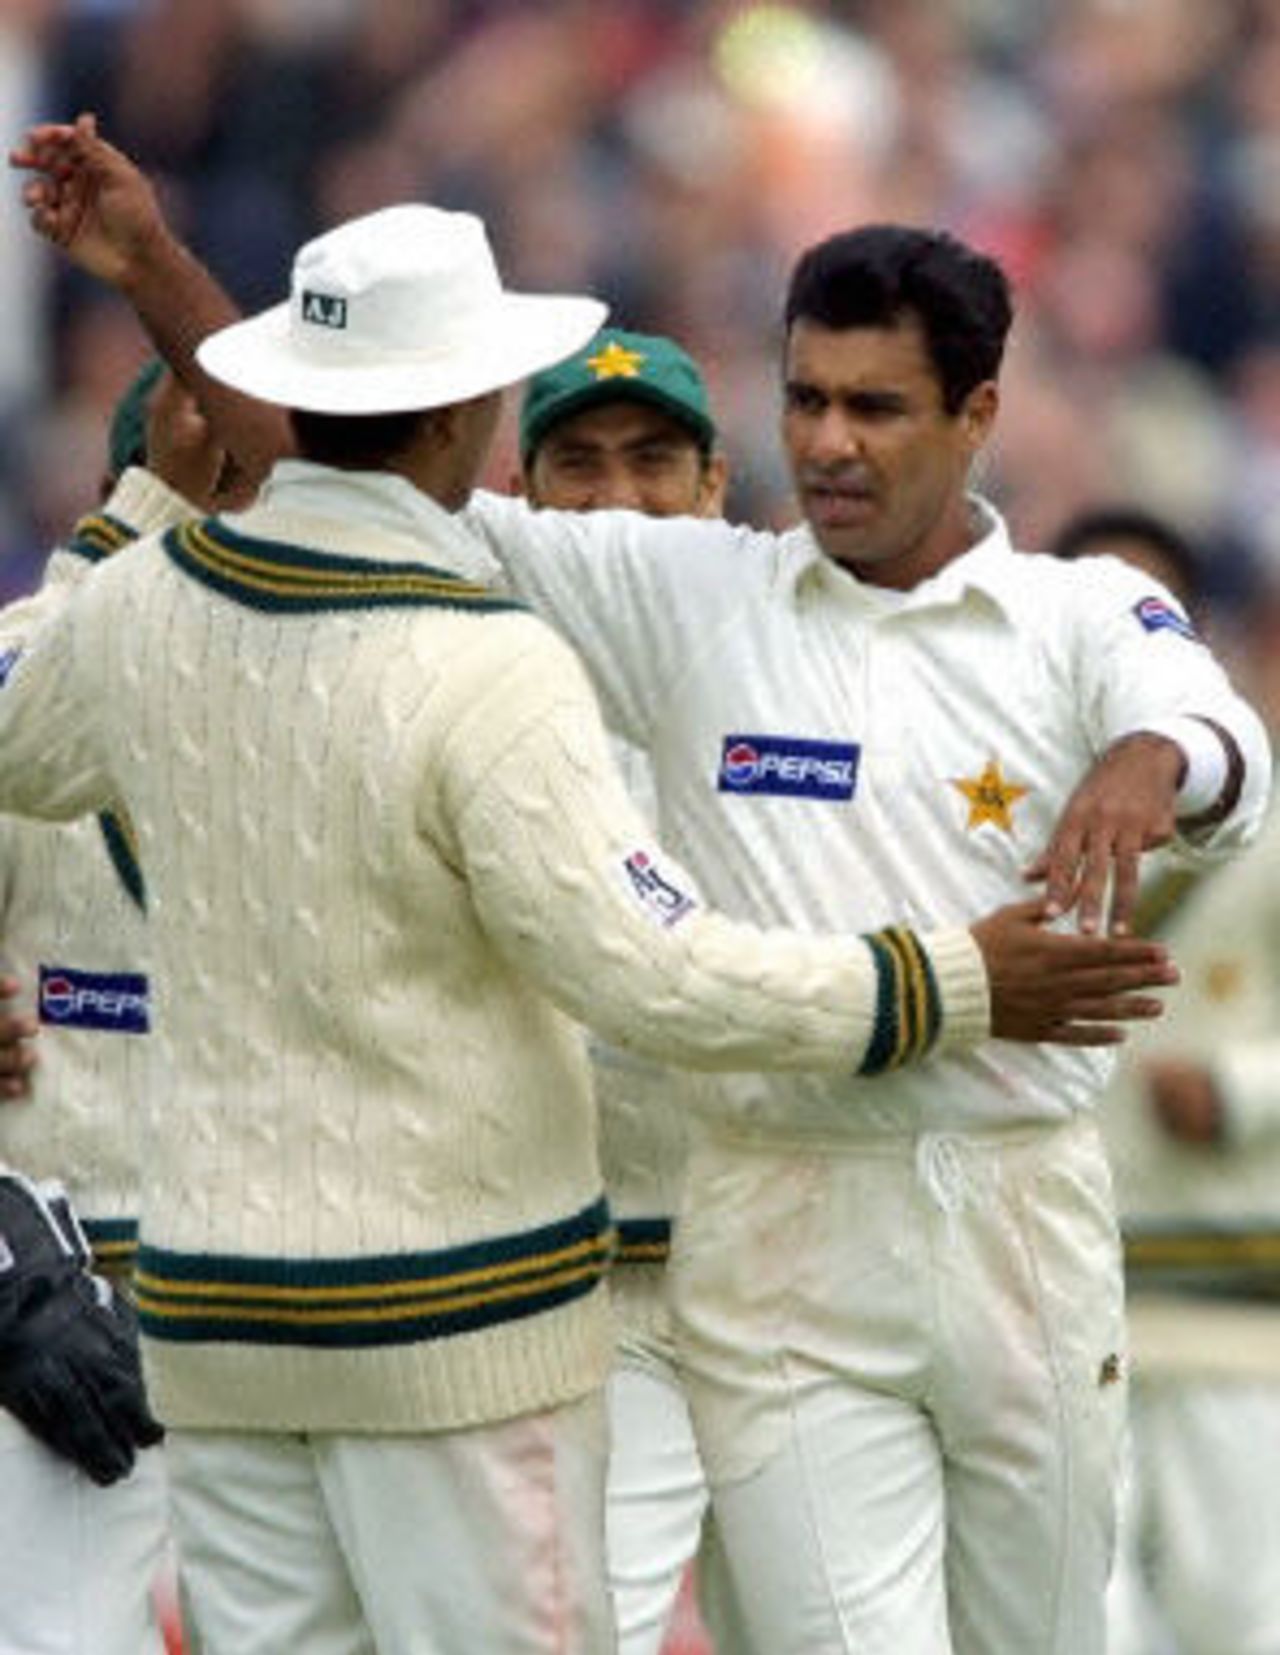 Waqar Younis and teammates celebrate running out Michael Vaughan, day 3, 2nd Test at Old Trafford, 17-21 May 2001.